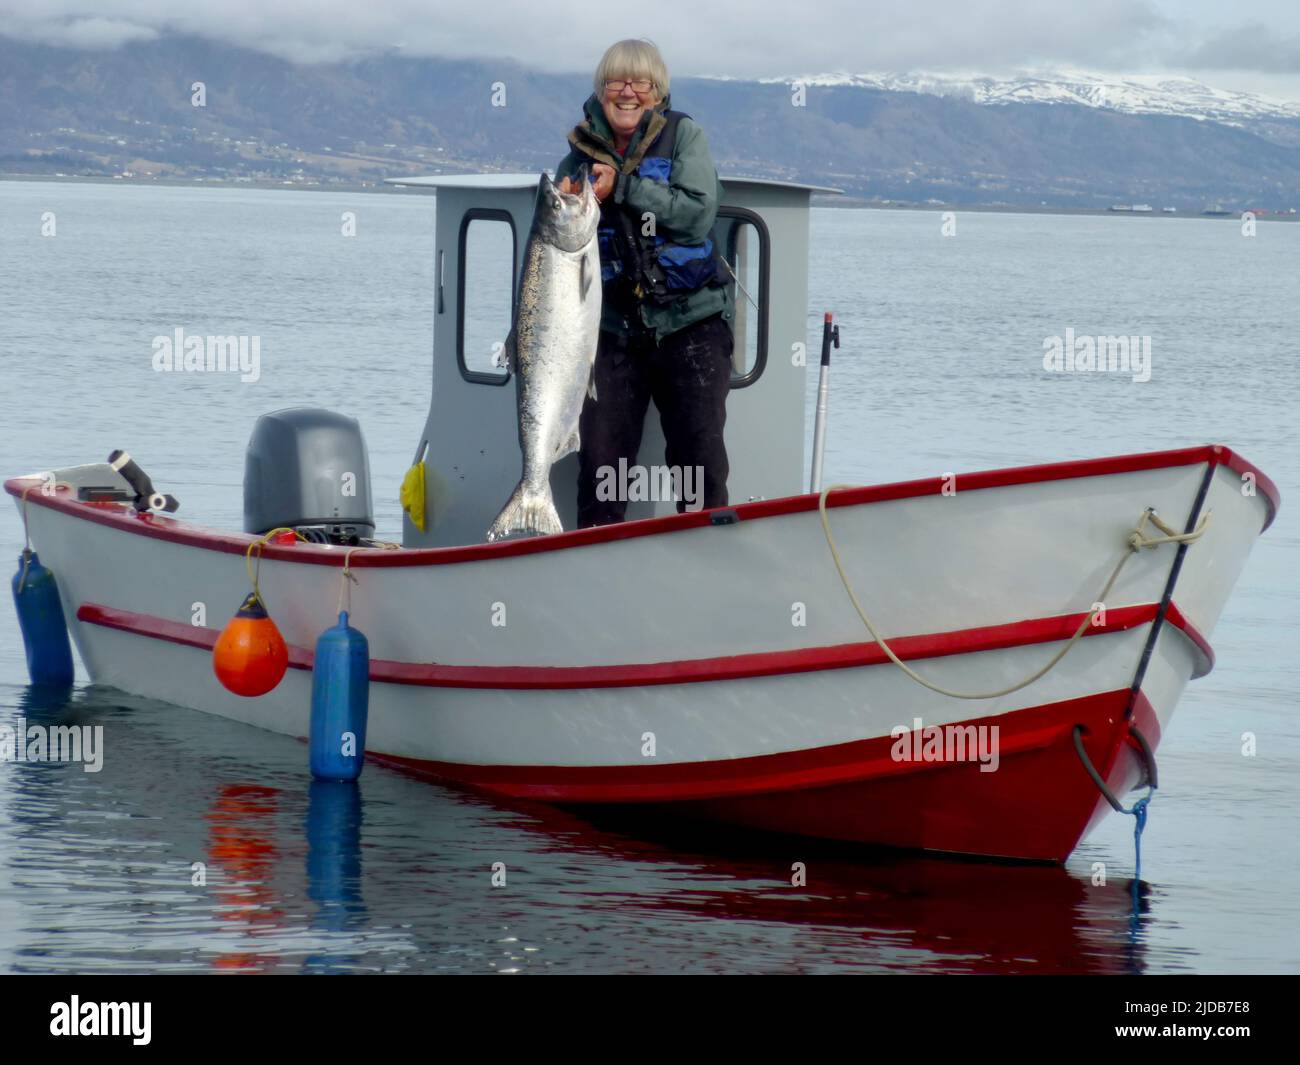 Longtime Homer resident Jane Miles shows off the 30-lbs king salmon caught while trolling for salmon in Kachemak Bay. Miles, a retired nurse, frequent Stock Photo